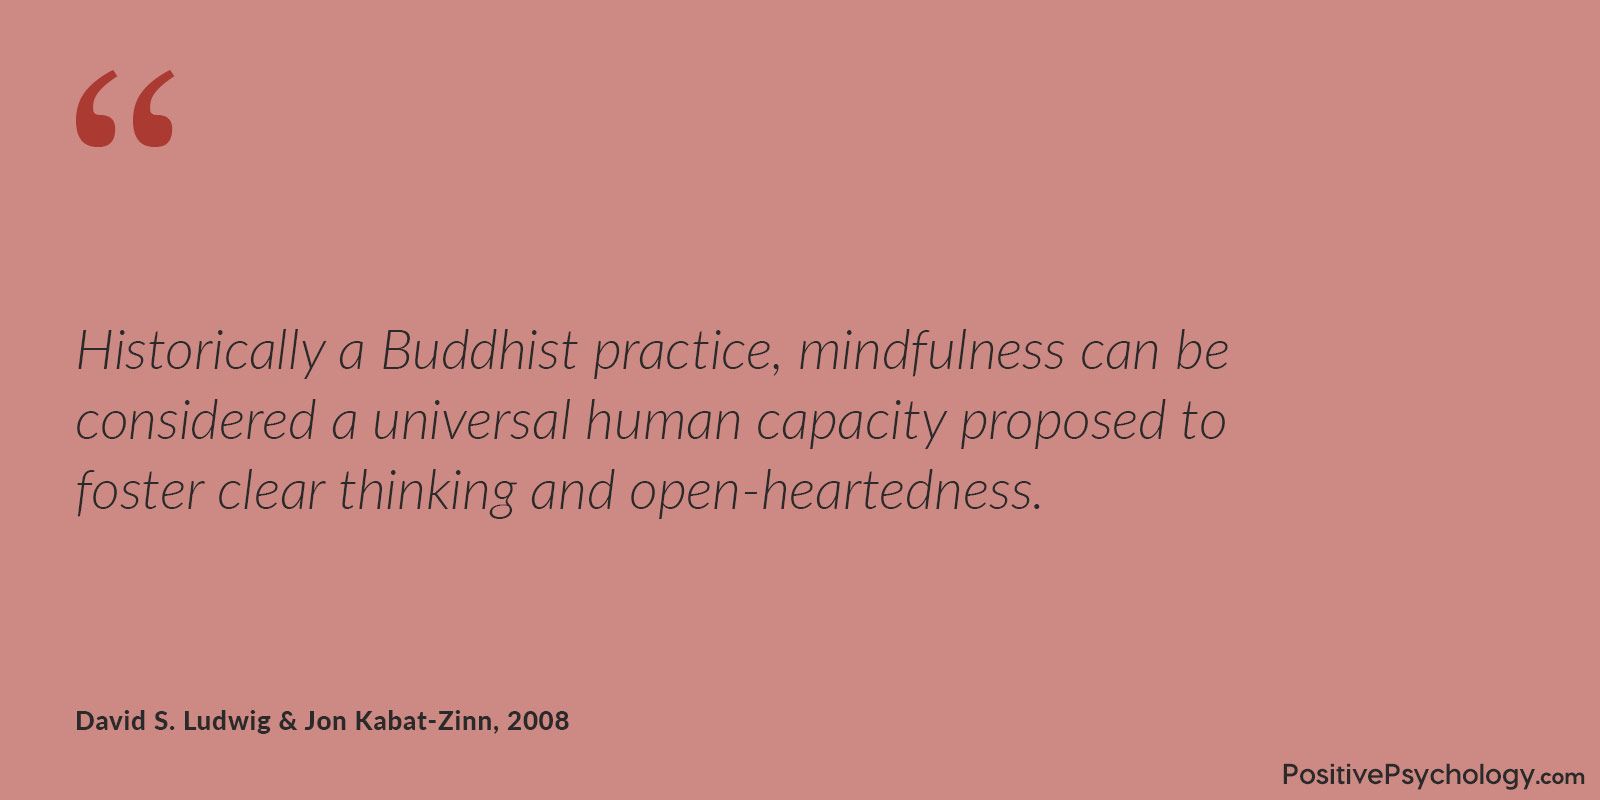 Mindfulness is a universal human capacity